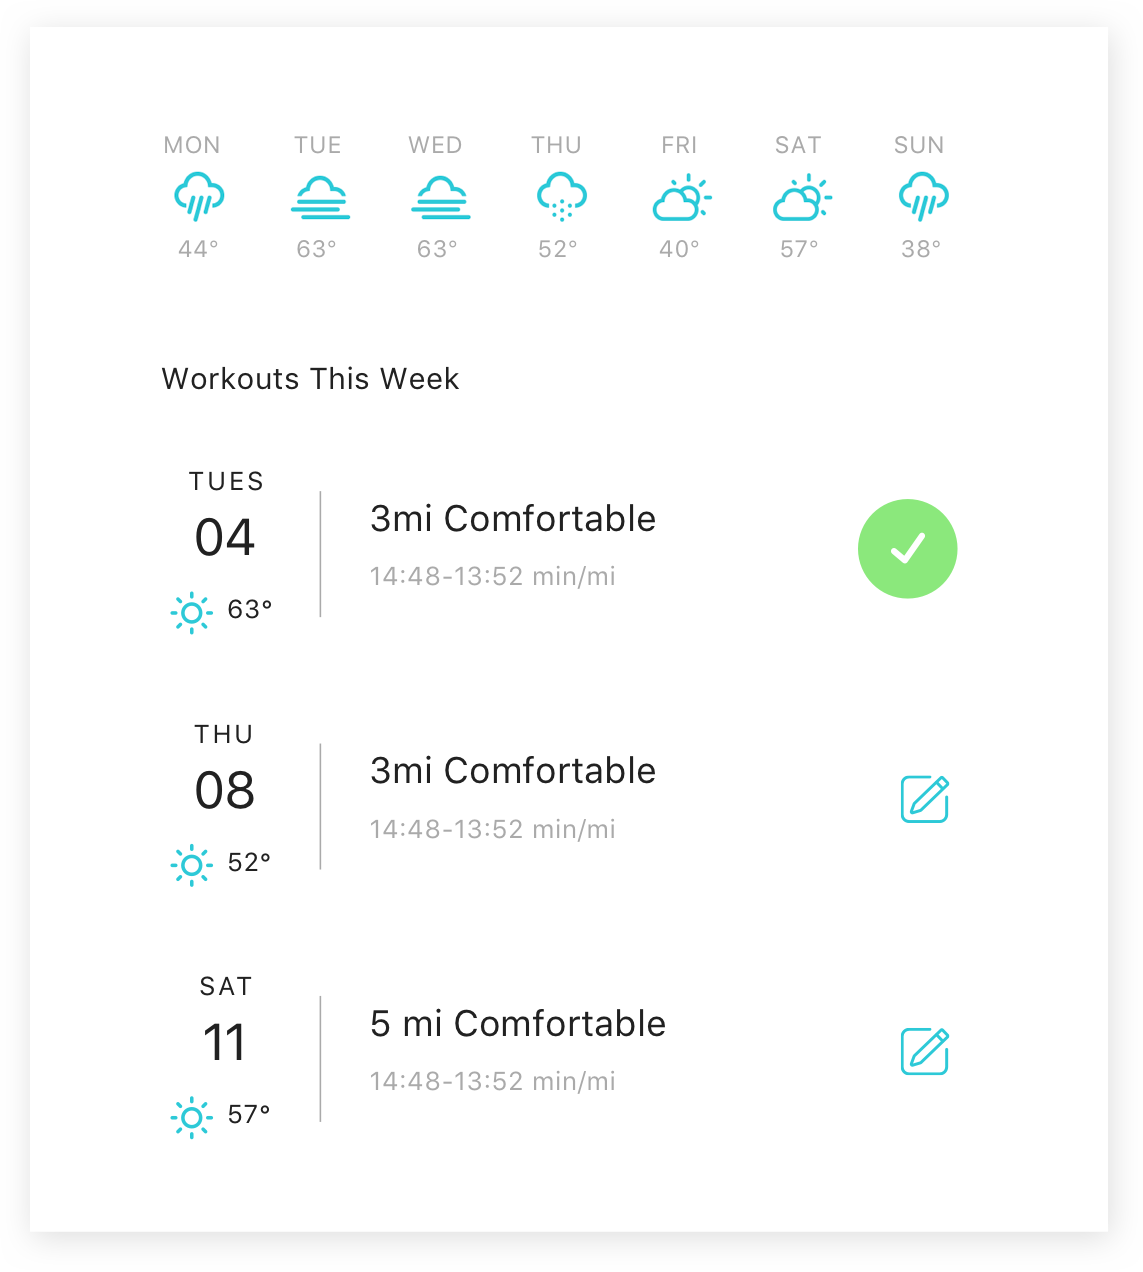 Screenshot from the Runkeeper app showing a weather forecast for the week.

